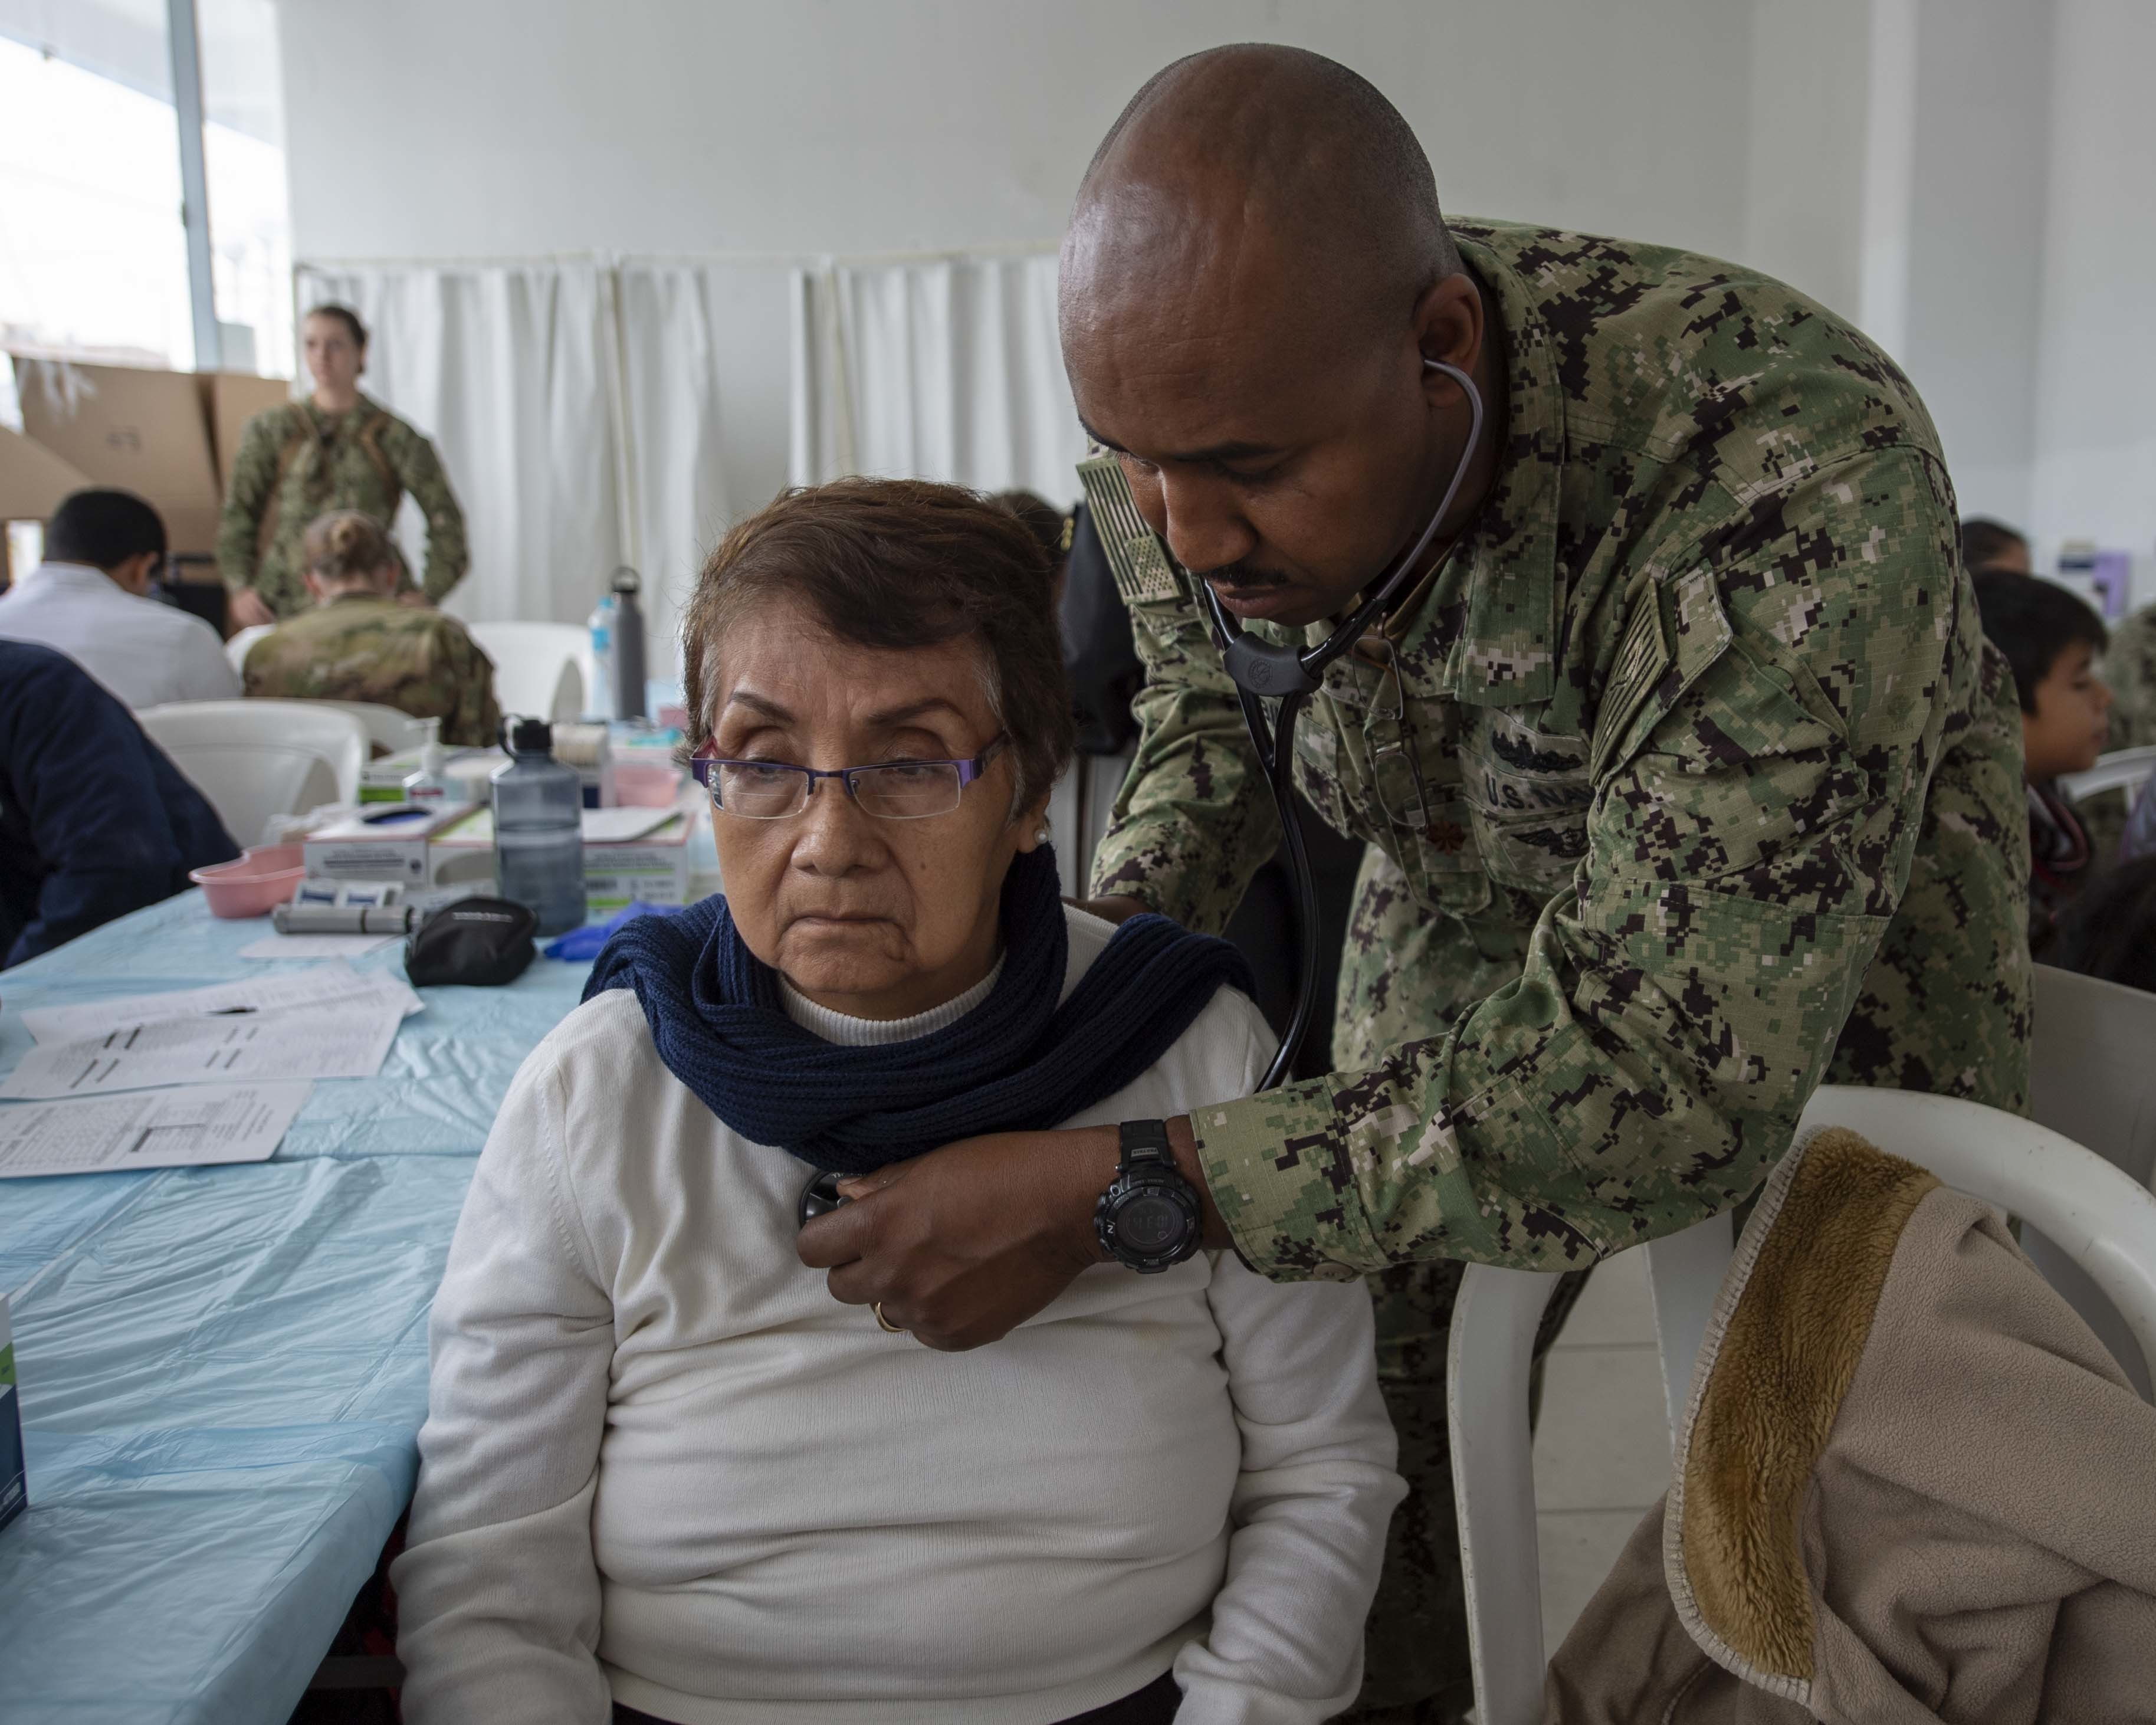 Lt. Cmdr. Jack Eric Tobin, a Navy nurse, assigned to the hospital ship USNS Comfort (T-AH 20), checks a patient’s vital signs at a temporary medical treatment site near Callao, Peru, on July 10, 2019. (U.S. Navy photo by Mass Communication Specialist 3rd Class Kryzentia Richards)